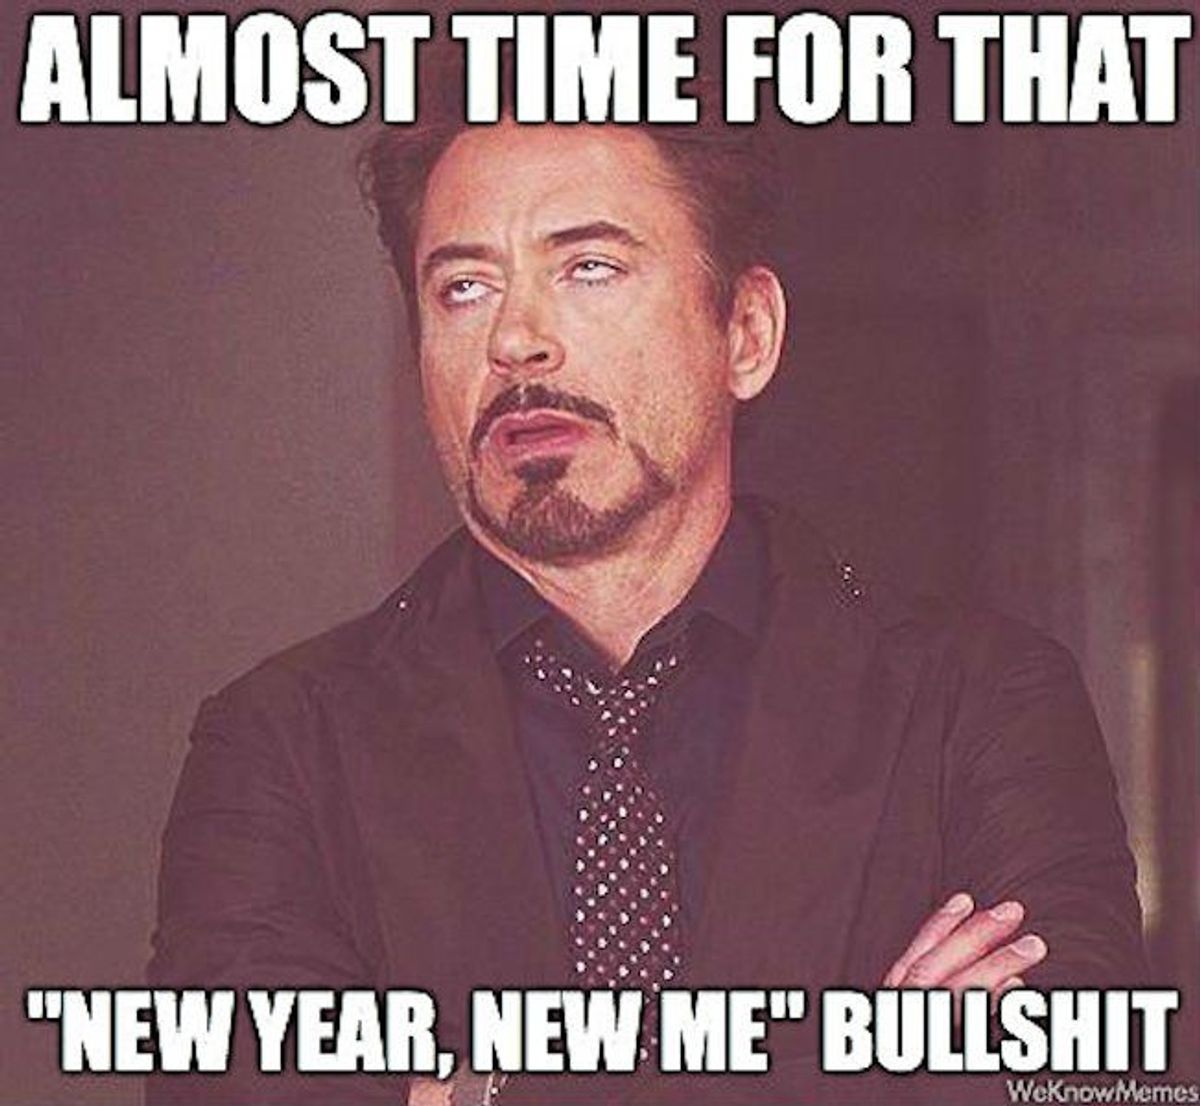 Stop With The "New Year New Me" BS